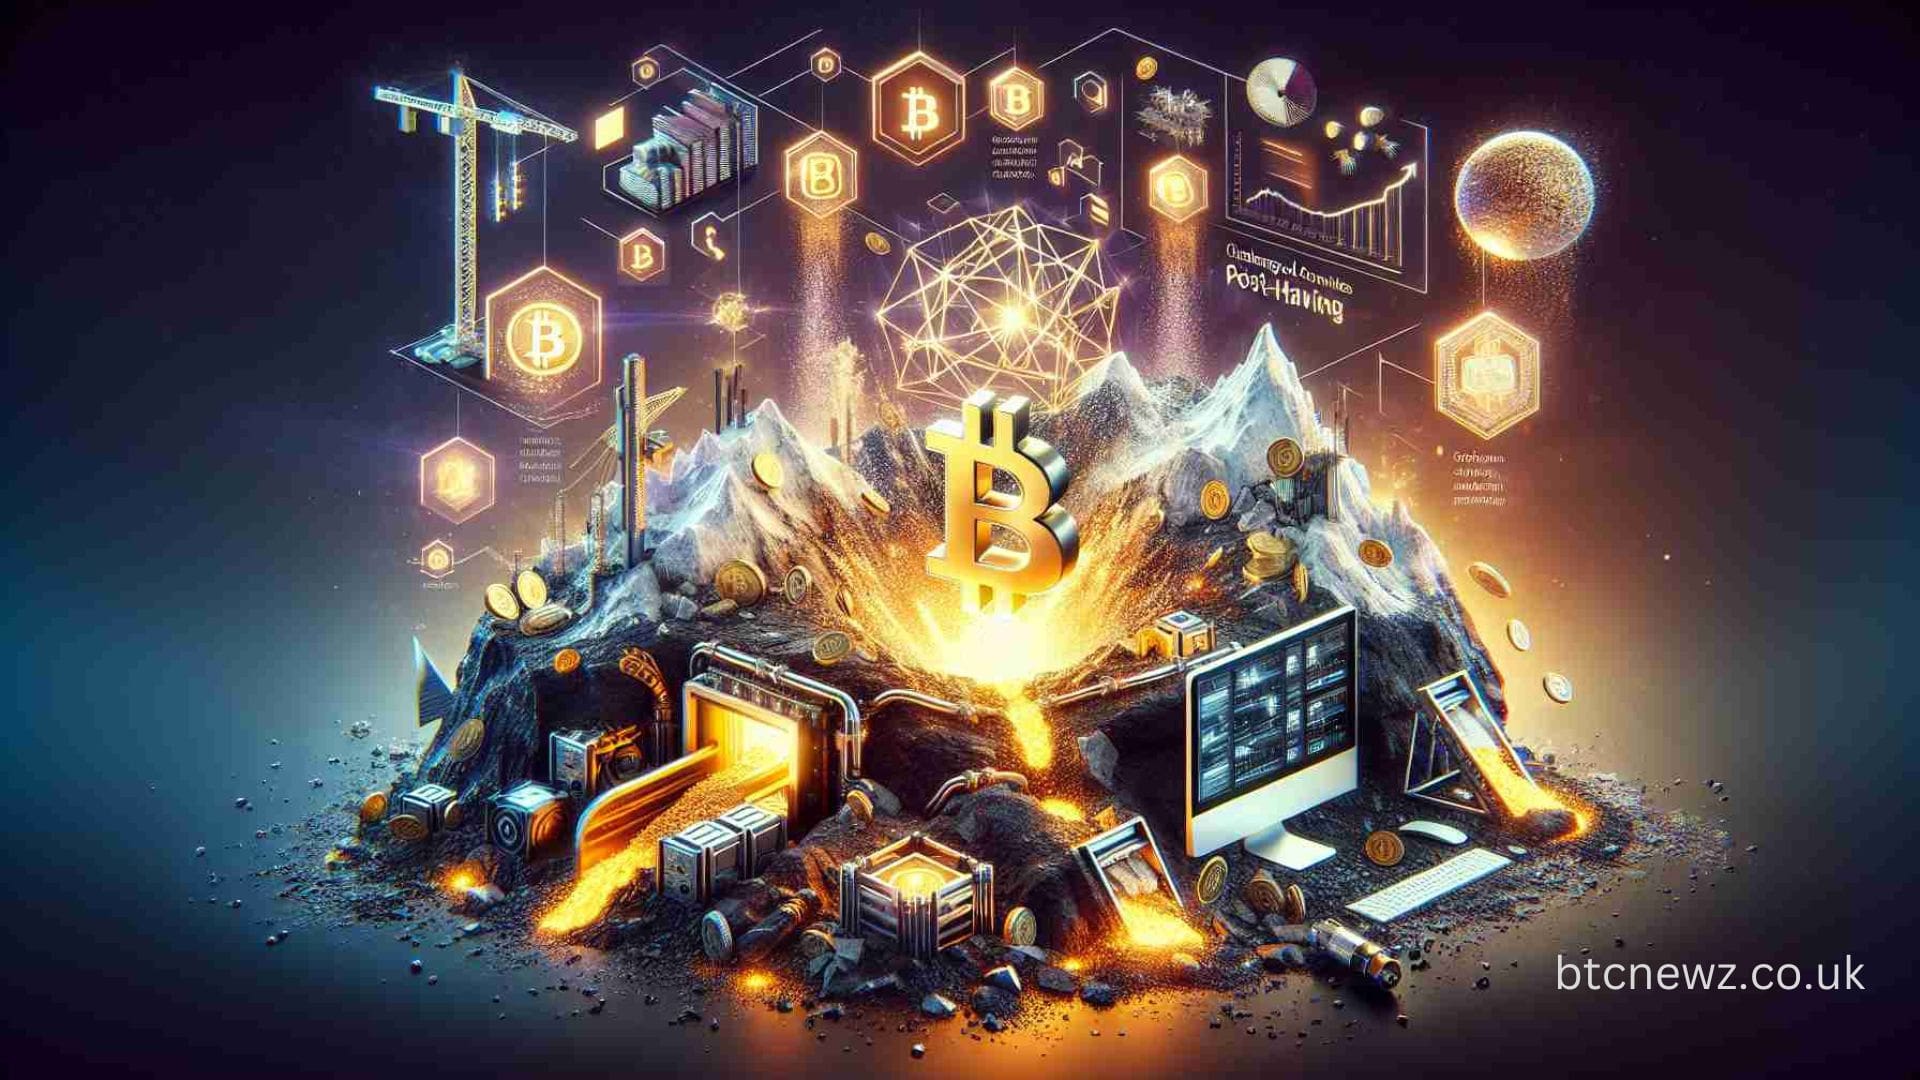 After halving, survival? Bitcoin mining challenges and opportunities